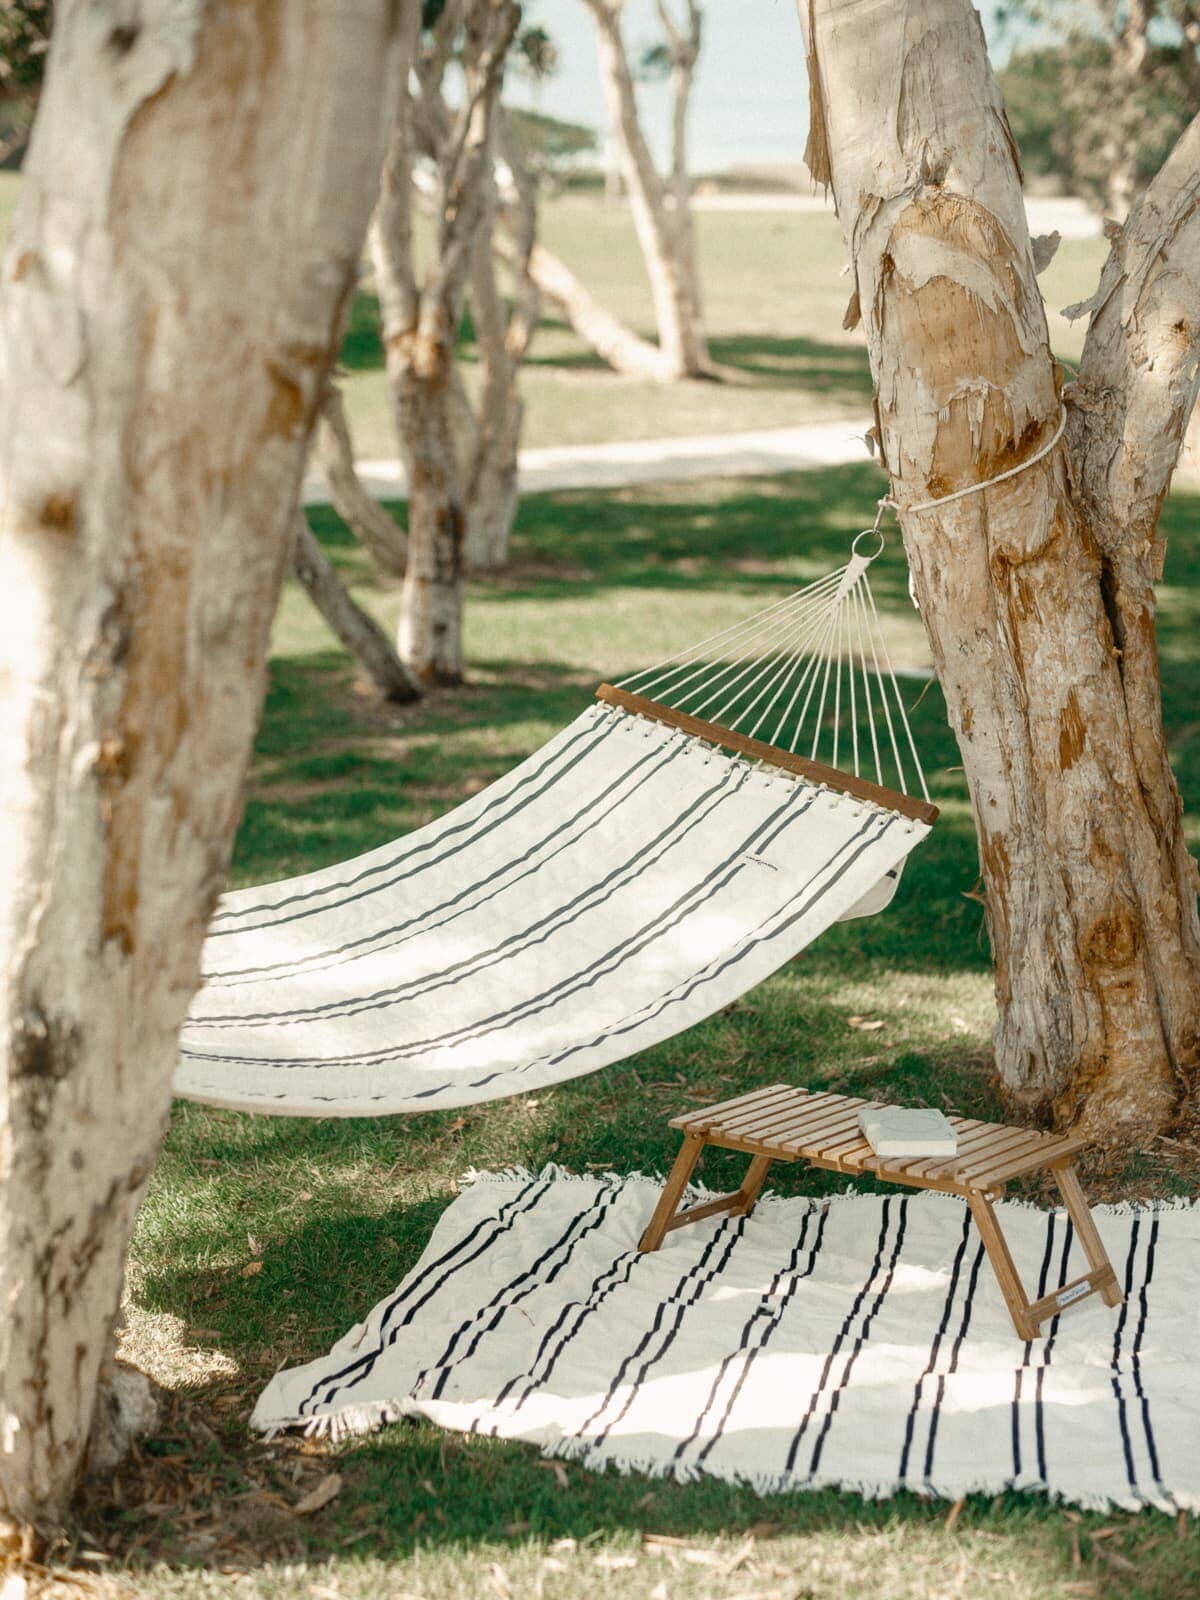 black and white hammock with table under tree on grass